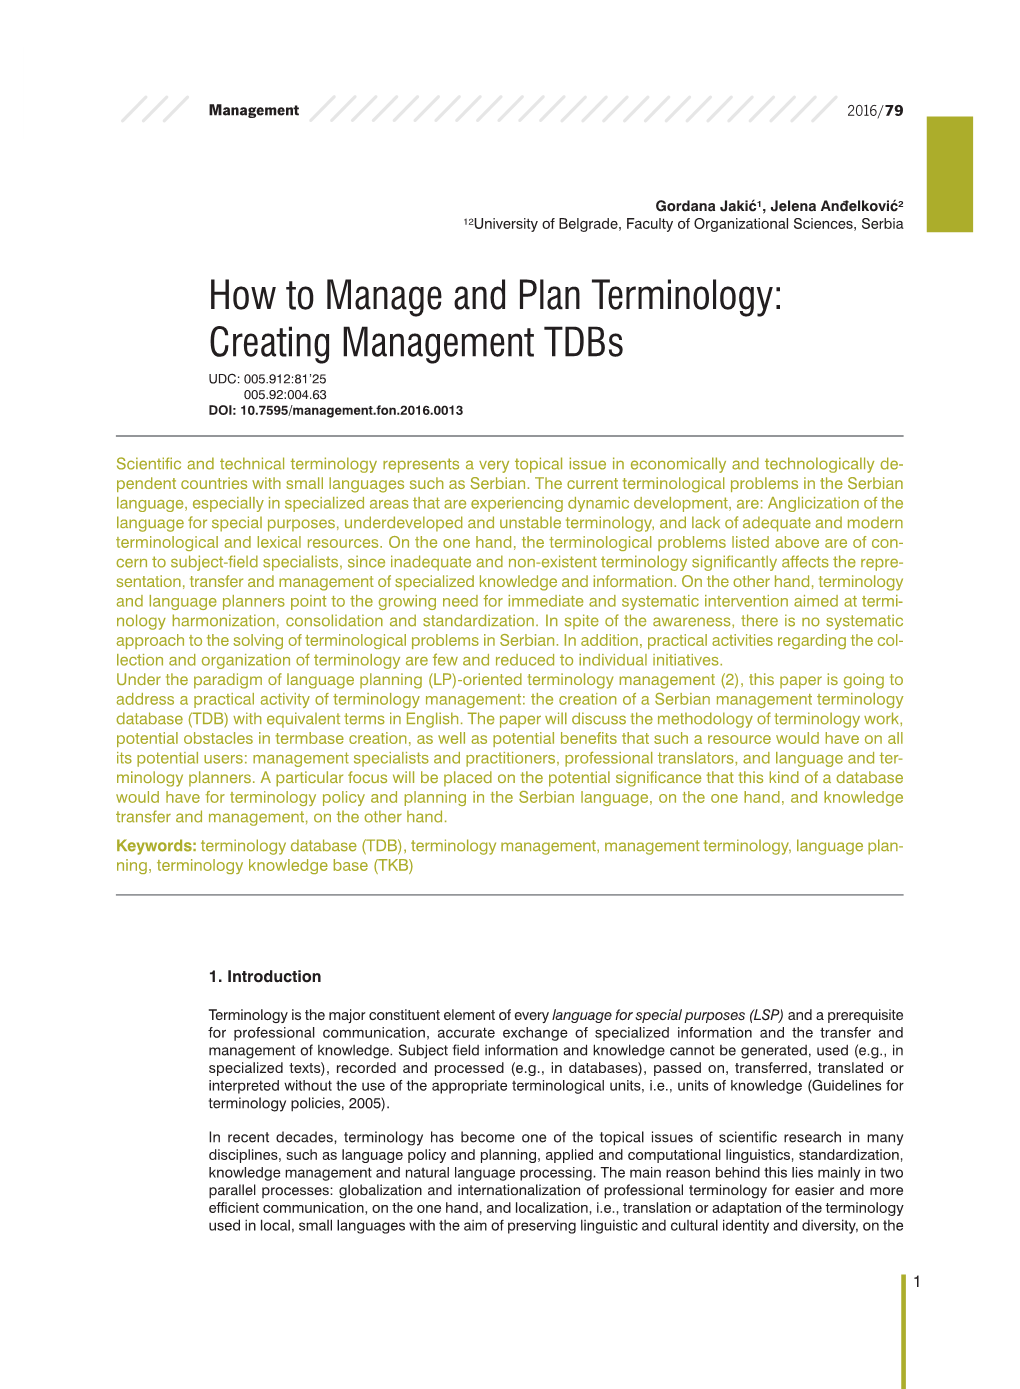 How to Manage and Plan Terminology: Creating Management Tdbs UDC: 005.912:81’25 005.92:004.63 DOI: 10.7595/Management.Fon.2016.0013